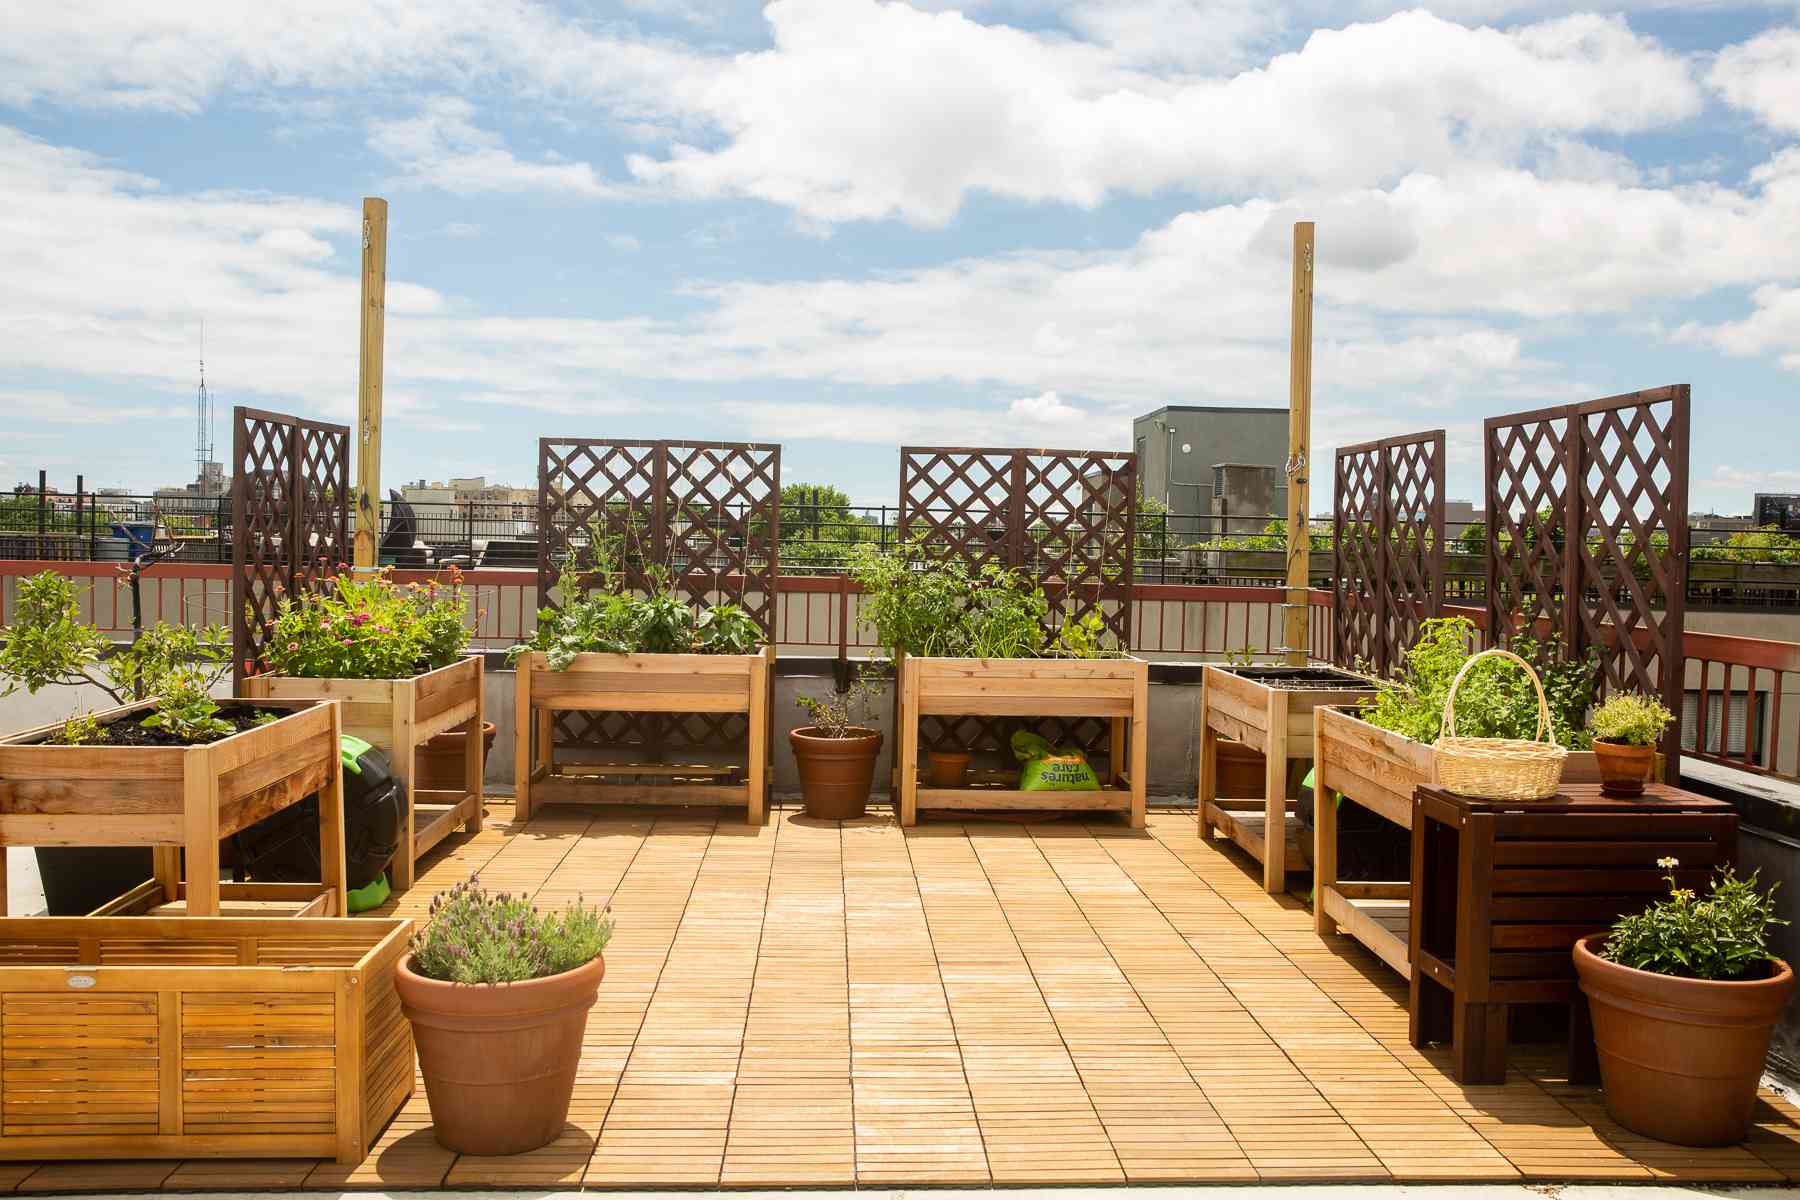 How Much Weight Can A Rooftop Garden Hold?